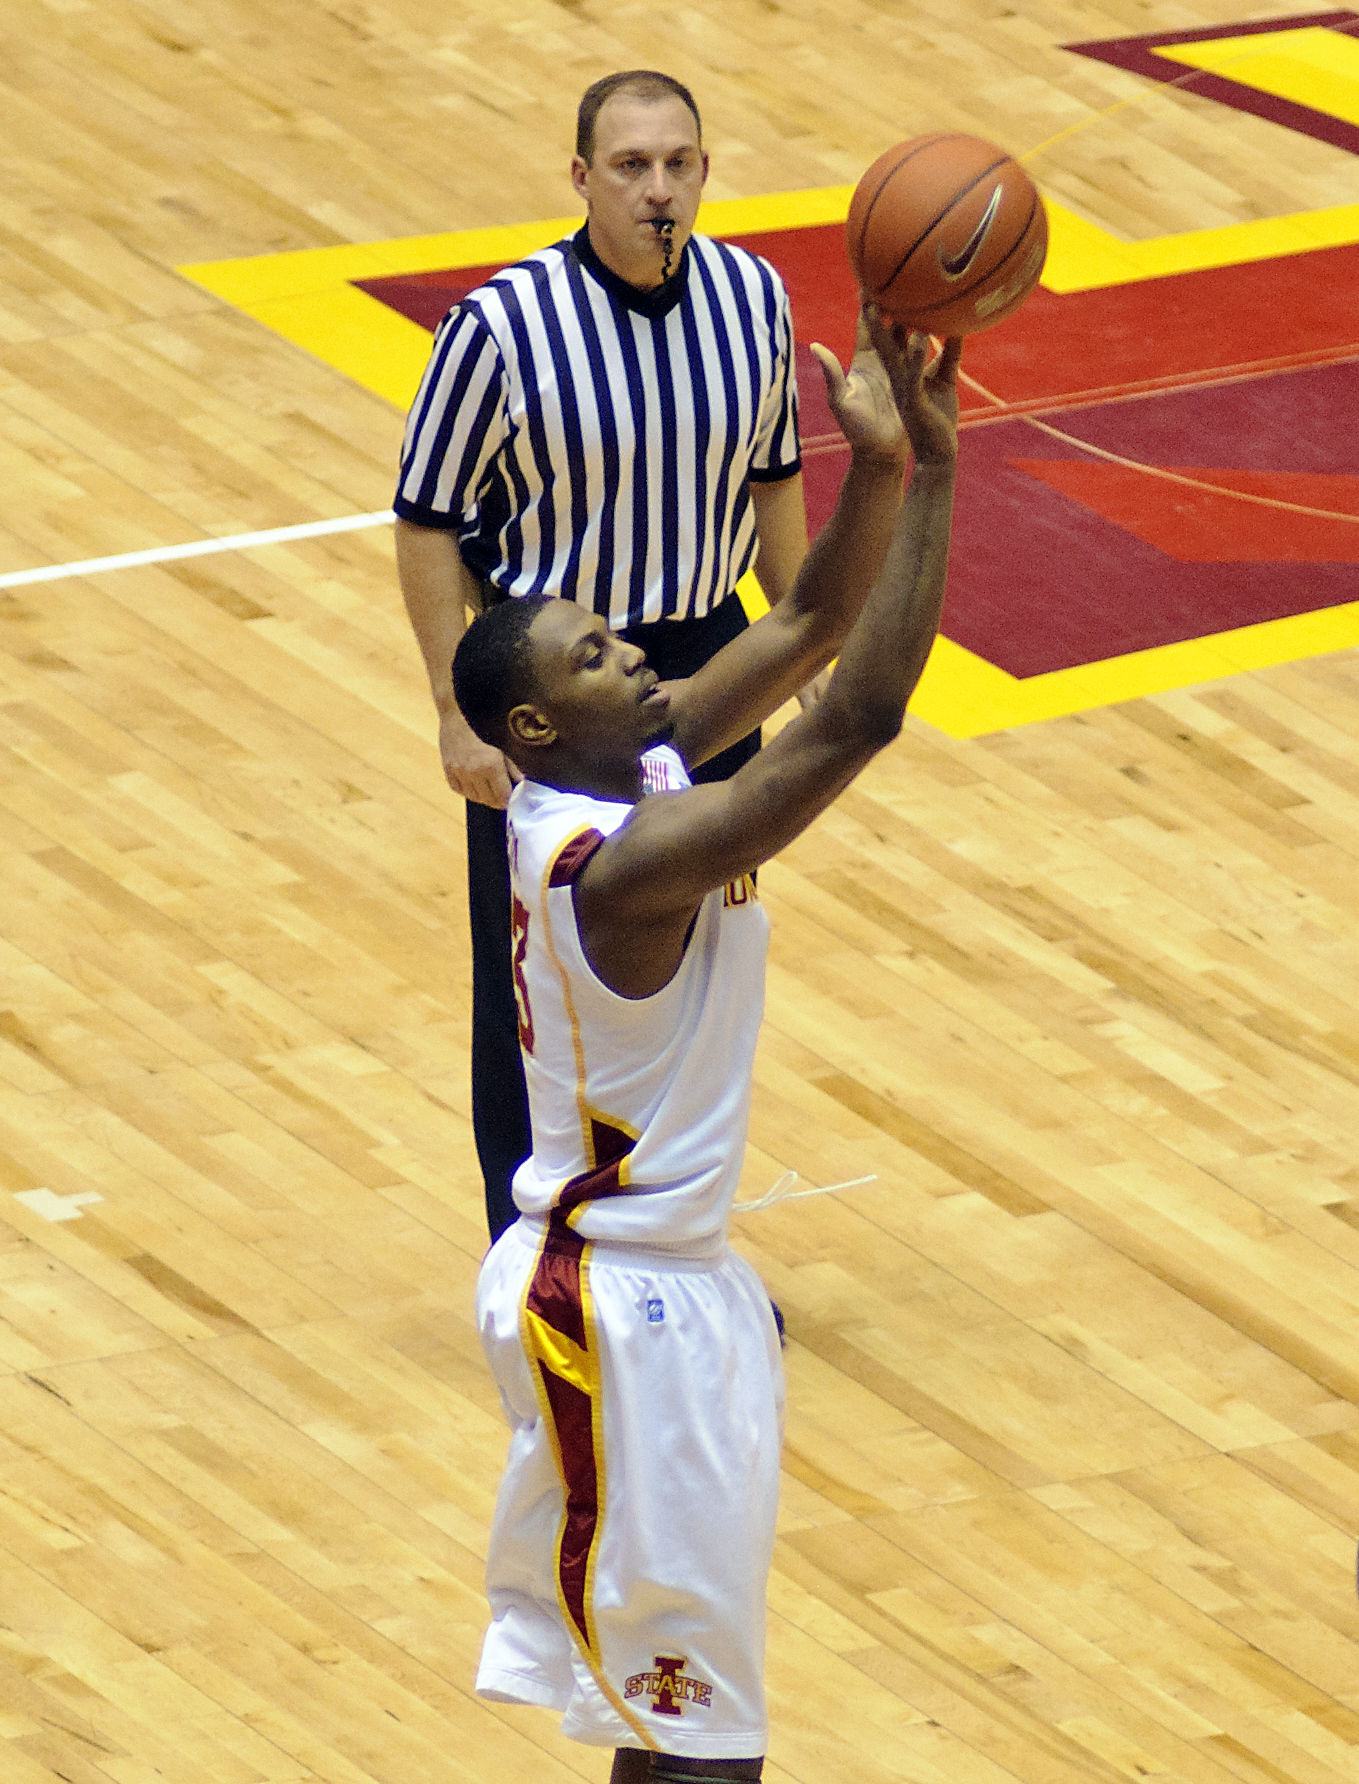 a referee standing next to a basketball player holding a ball